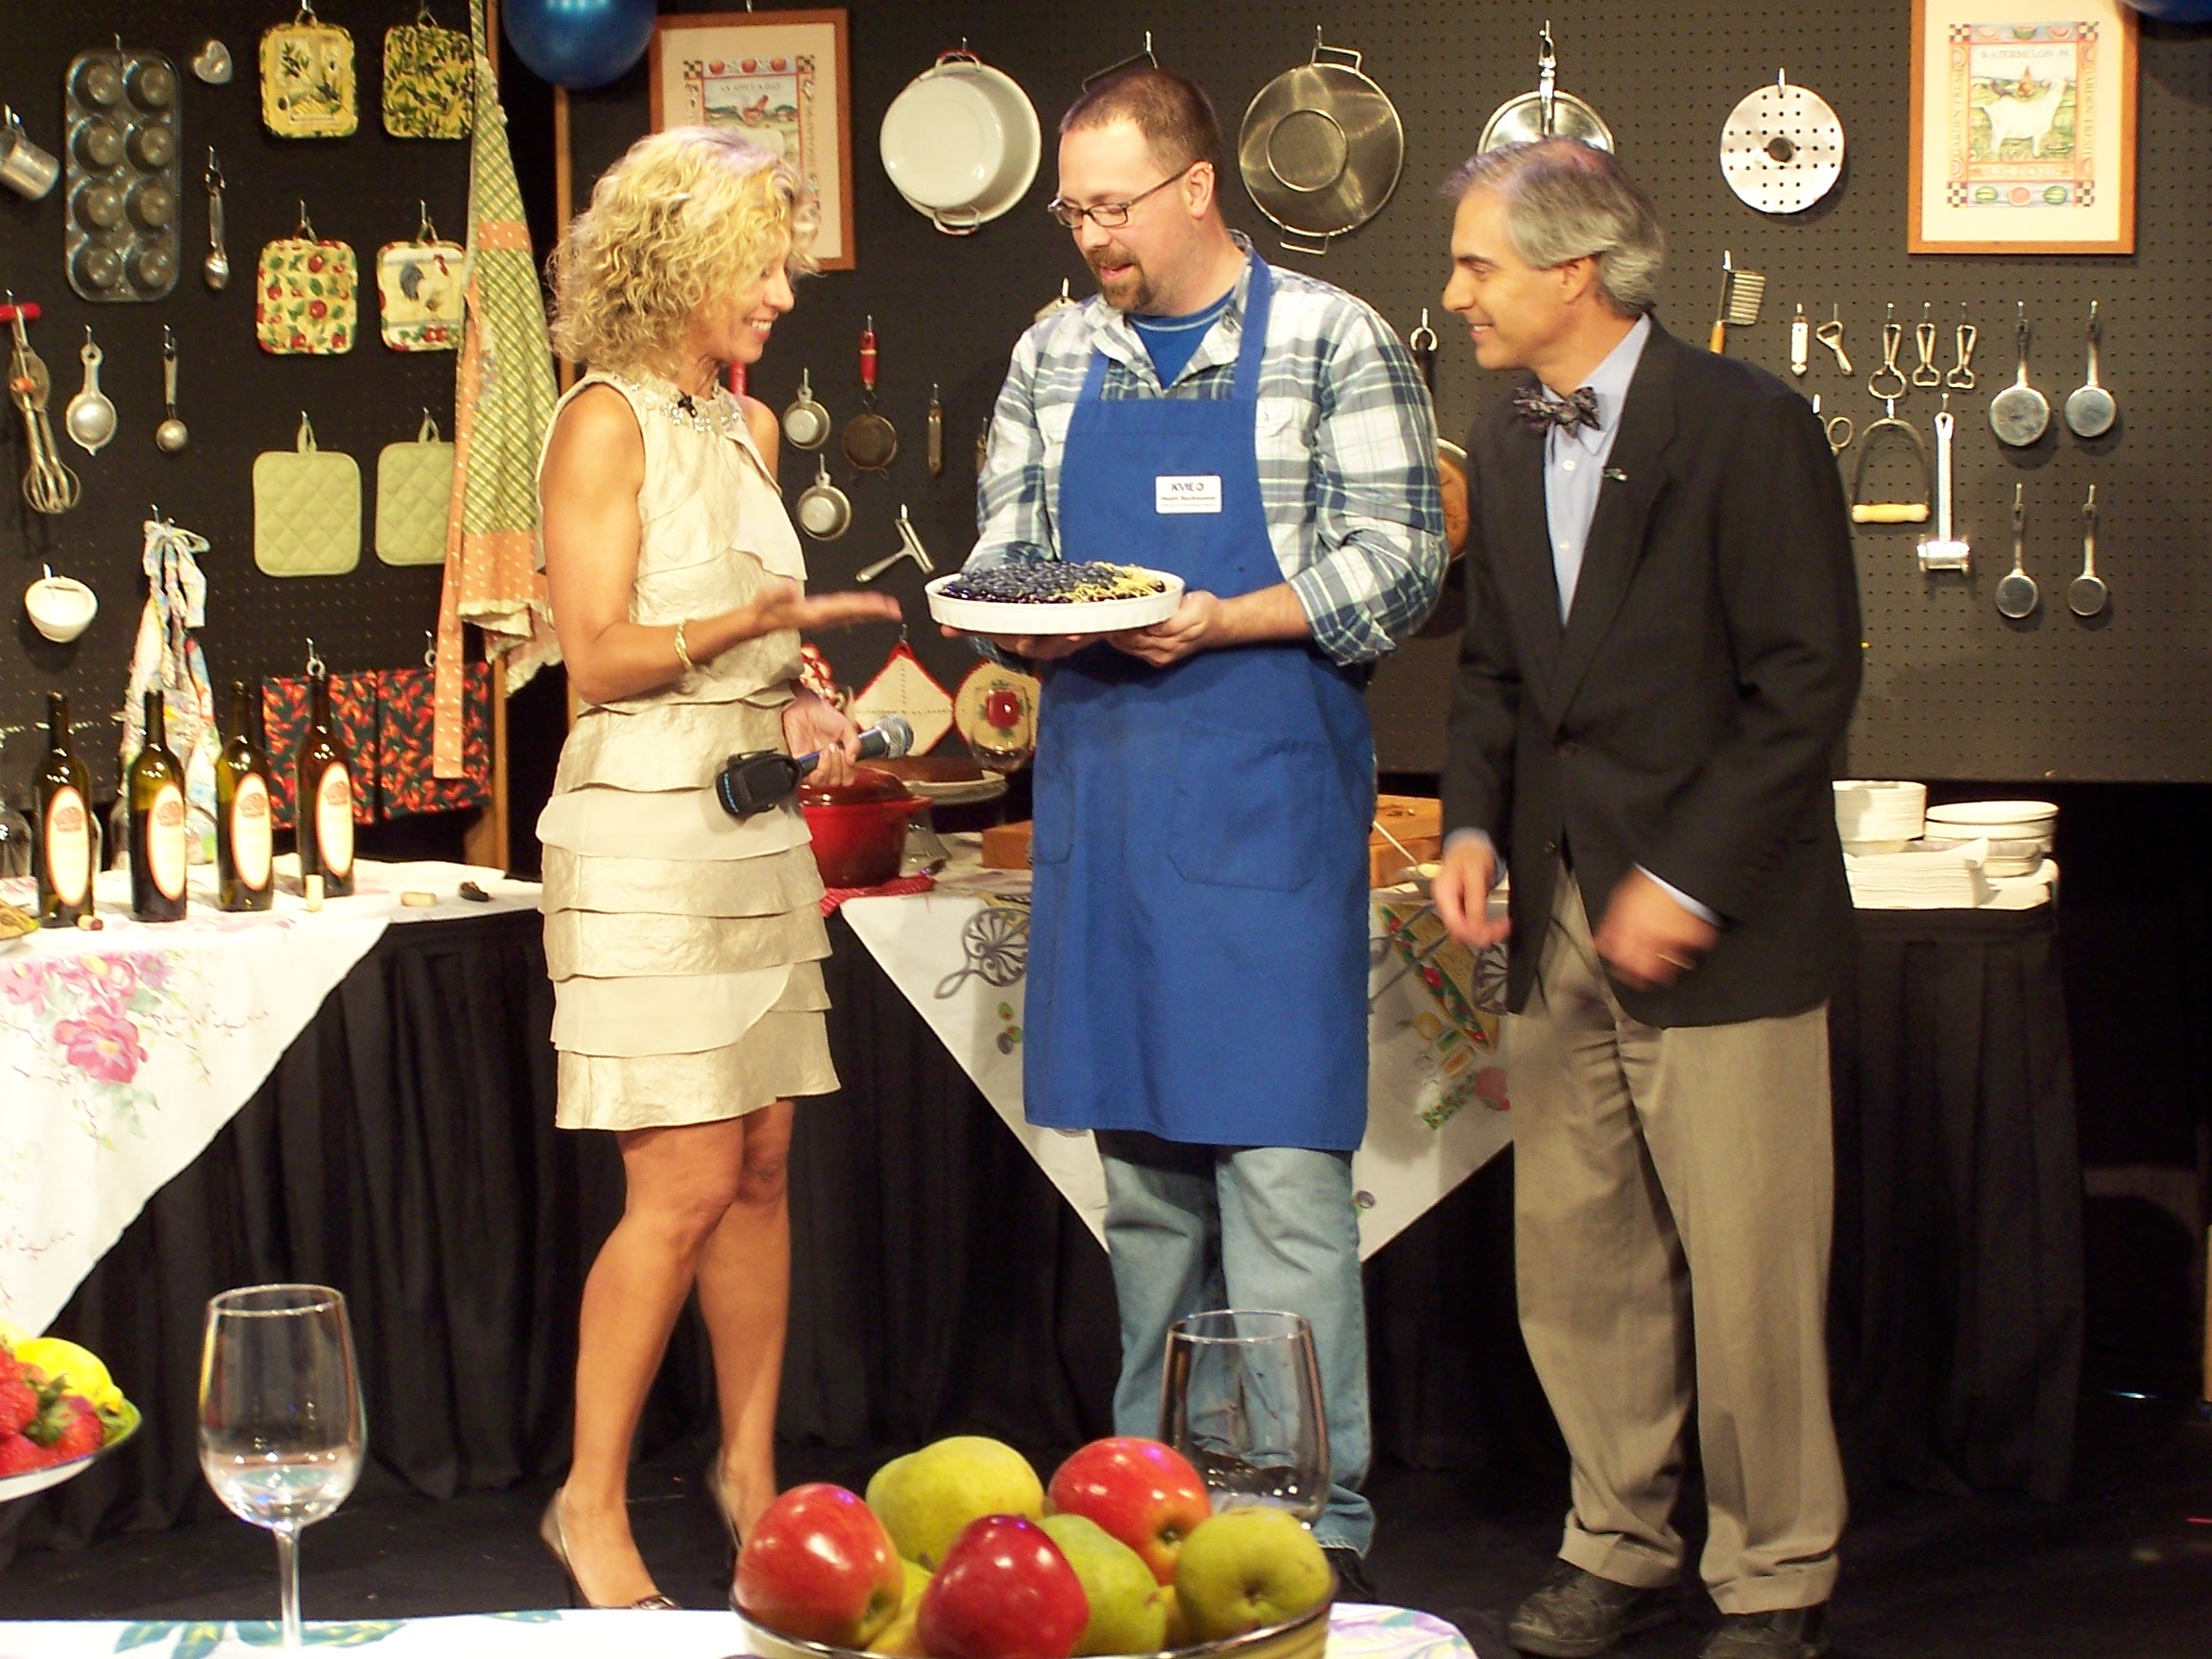 Heath interviewed by Sharon Gerber and Kevin Smith-Fagan, during the KVIE celebration of Julia Child's 100th Birthday